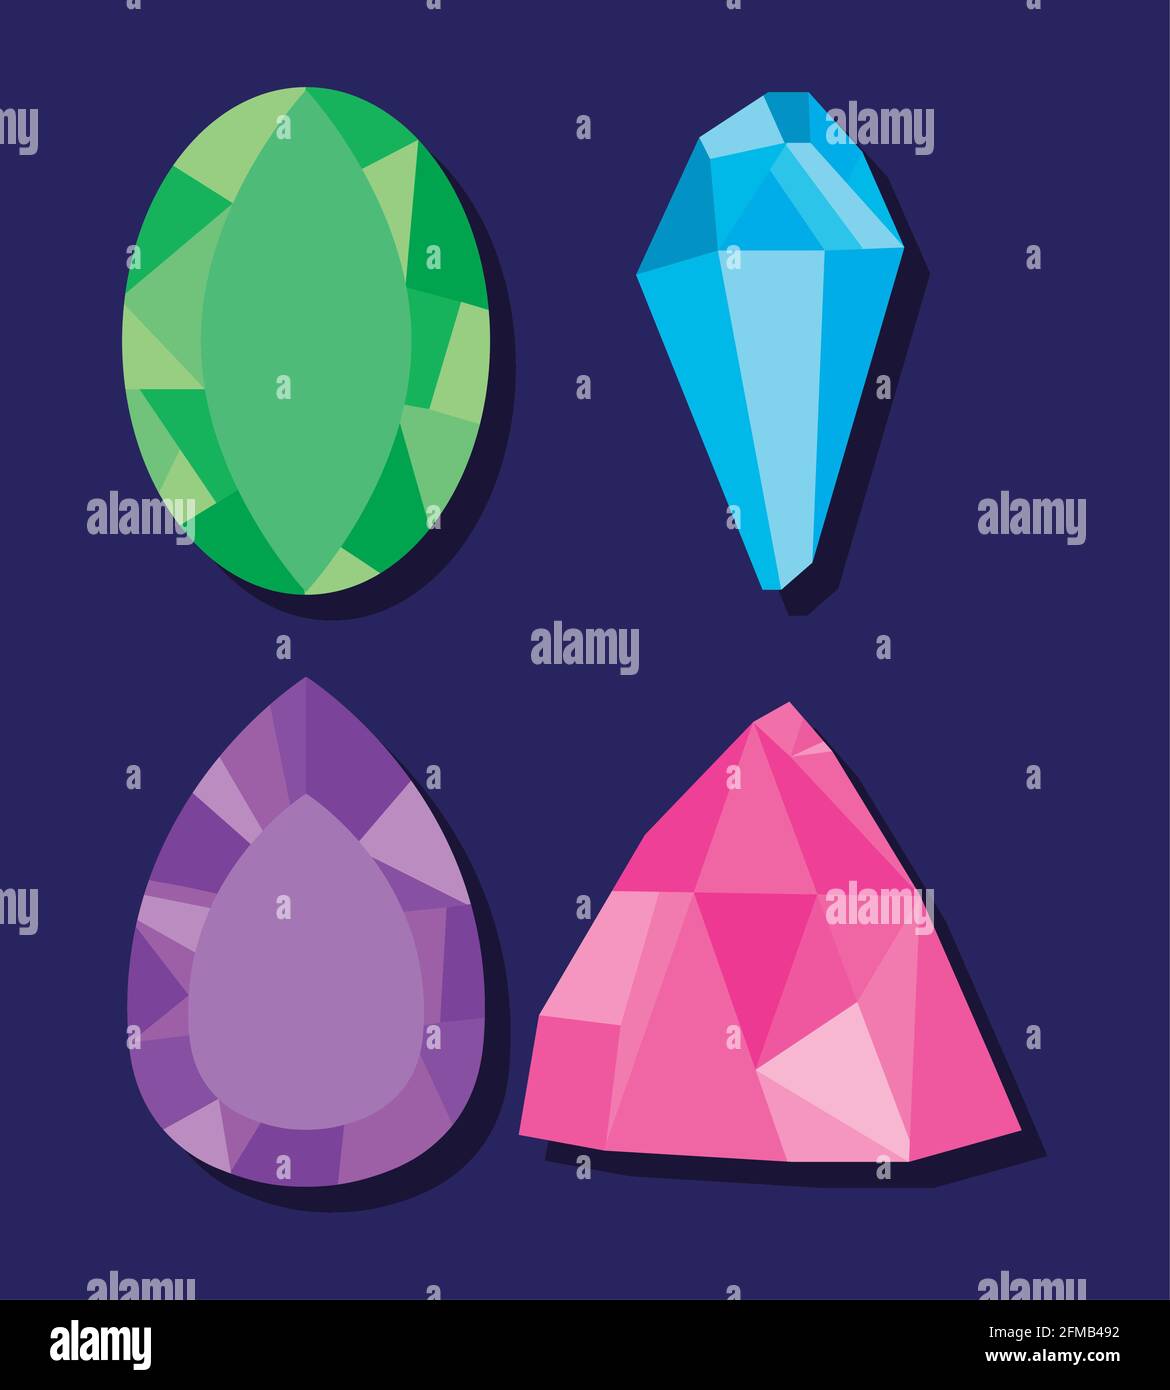 icon set of colorful gemstones Stock Vector